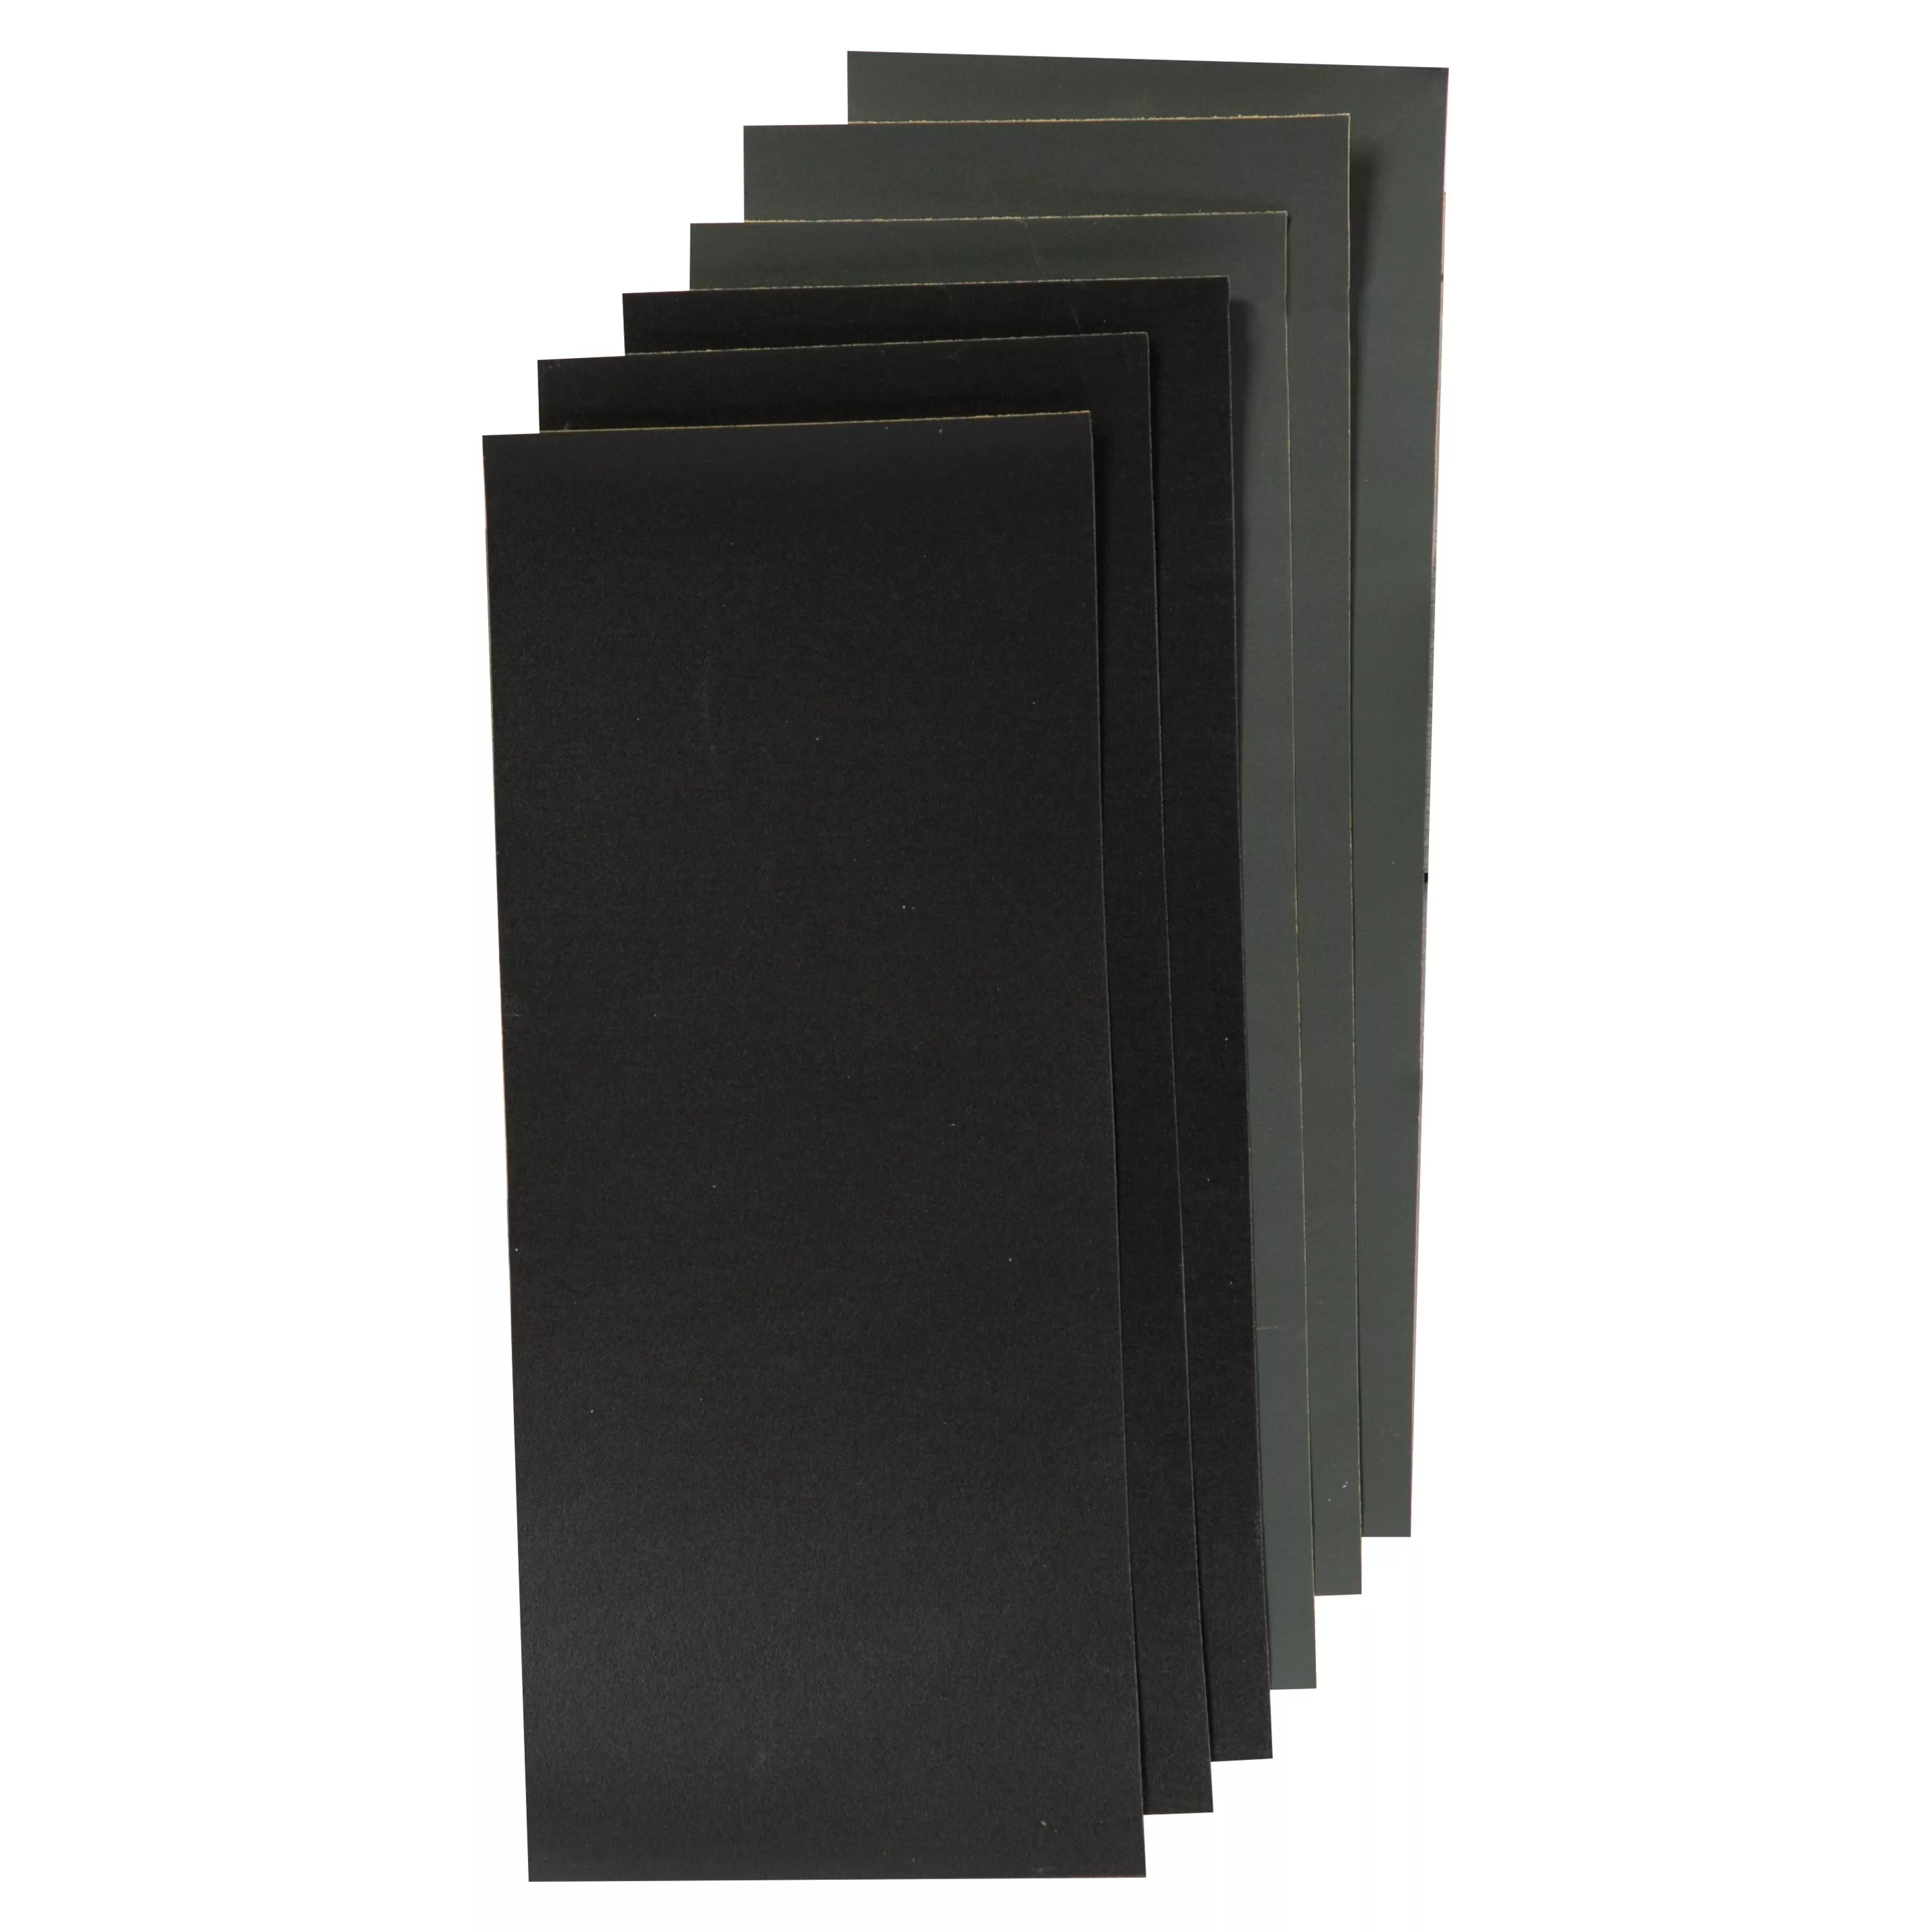 3M™ Performance Sandpaper 39605SRP, 3-2/3 in x 9 in, 800/1000 Grit, 6
Sheet/Pack, 6 Pack/Case